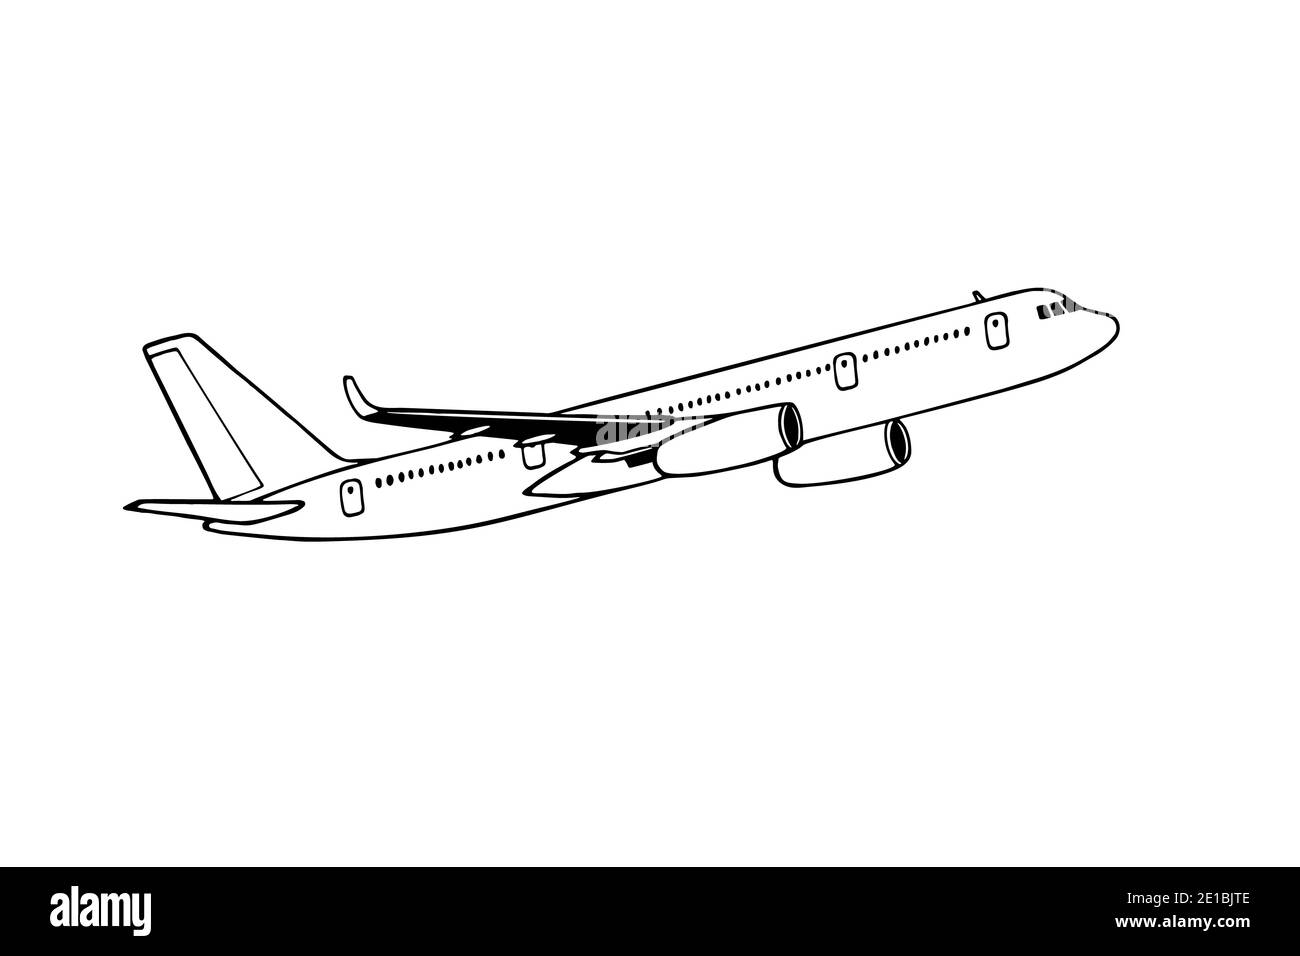 Airplane Cartoon Images  Free Photos PNG Stickers Wallpapers   Backgrounds  rawpixel